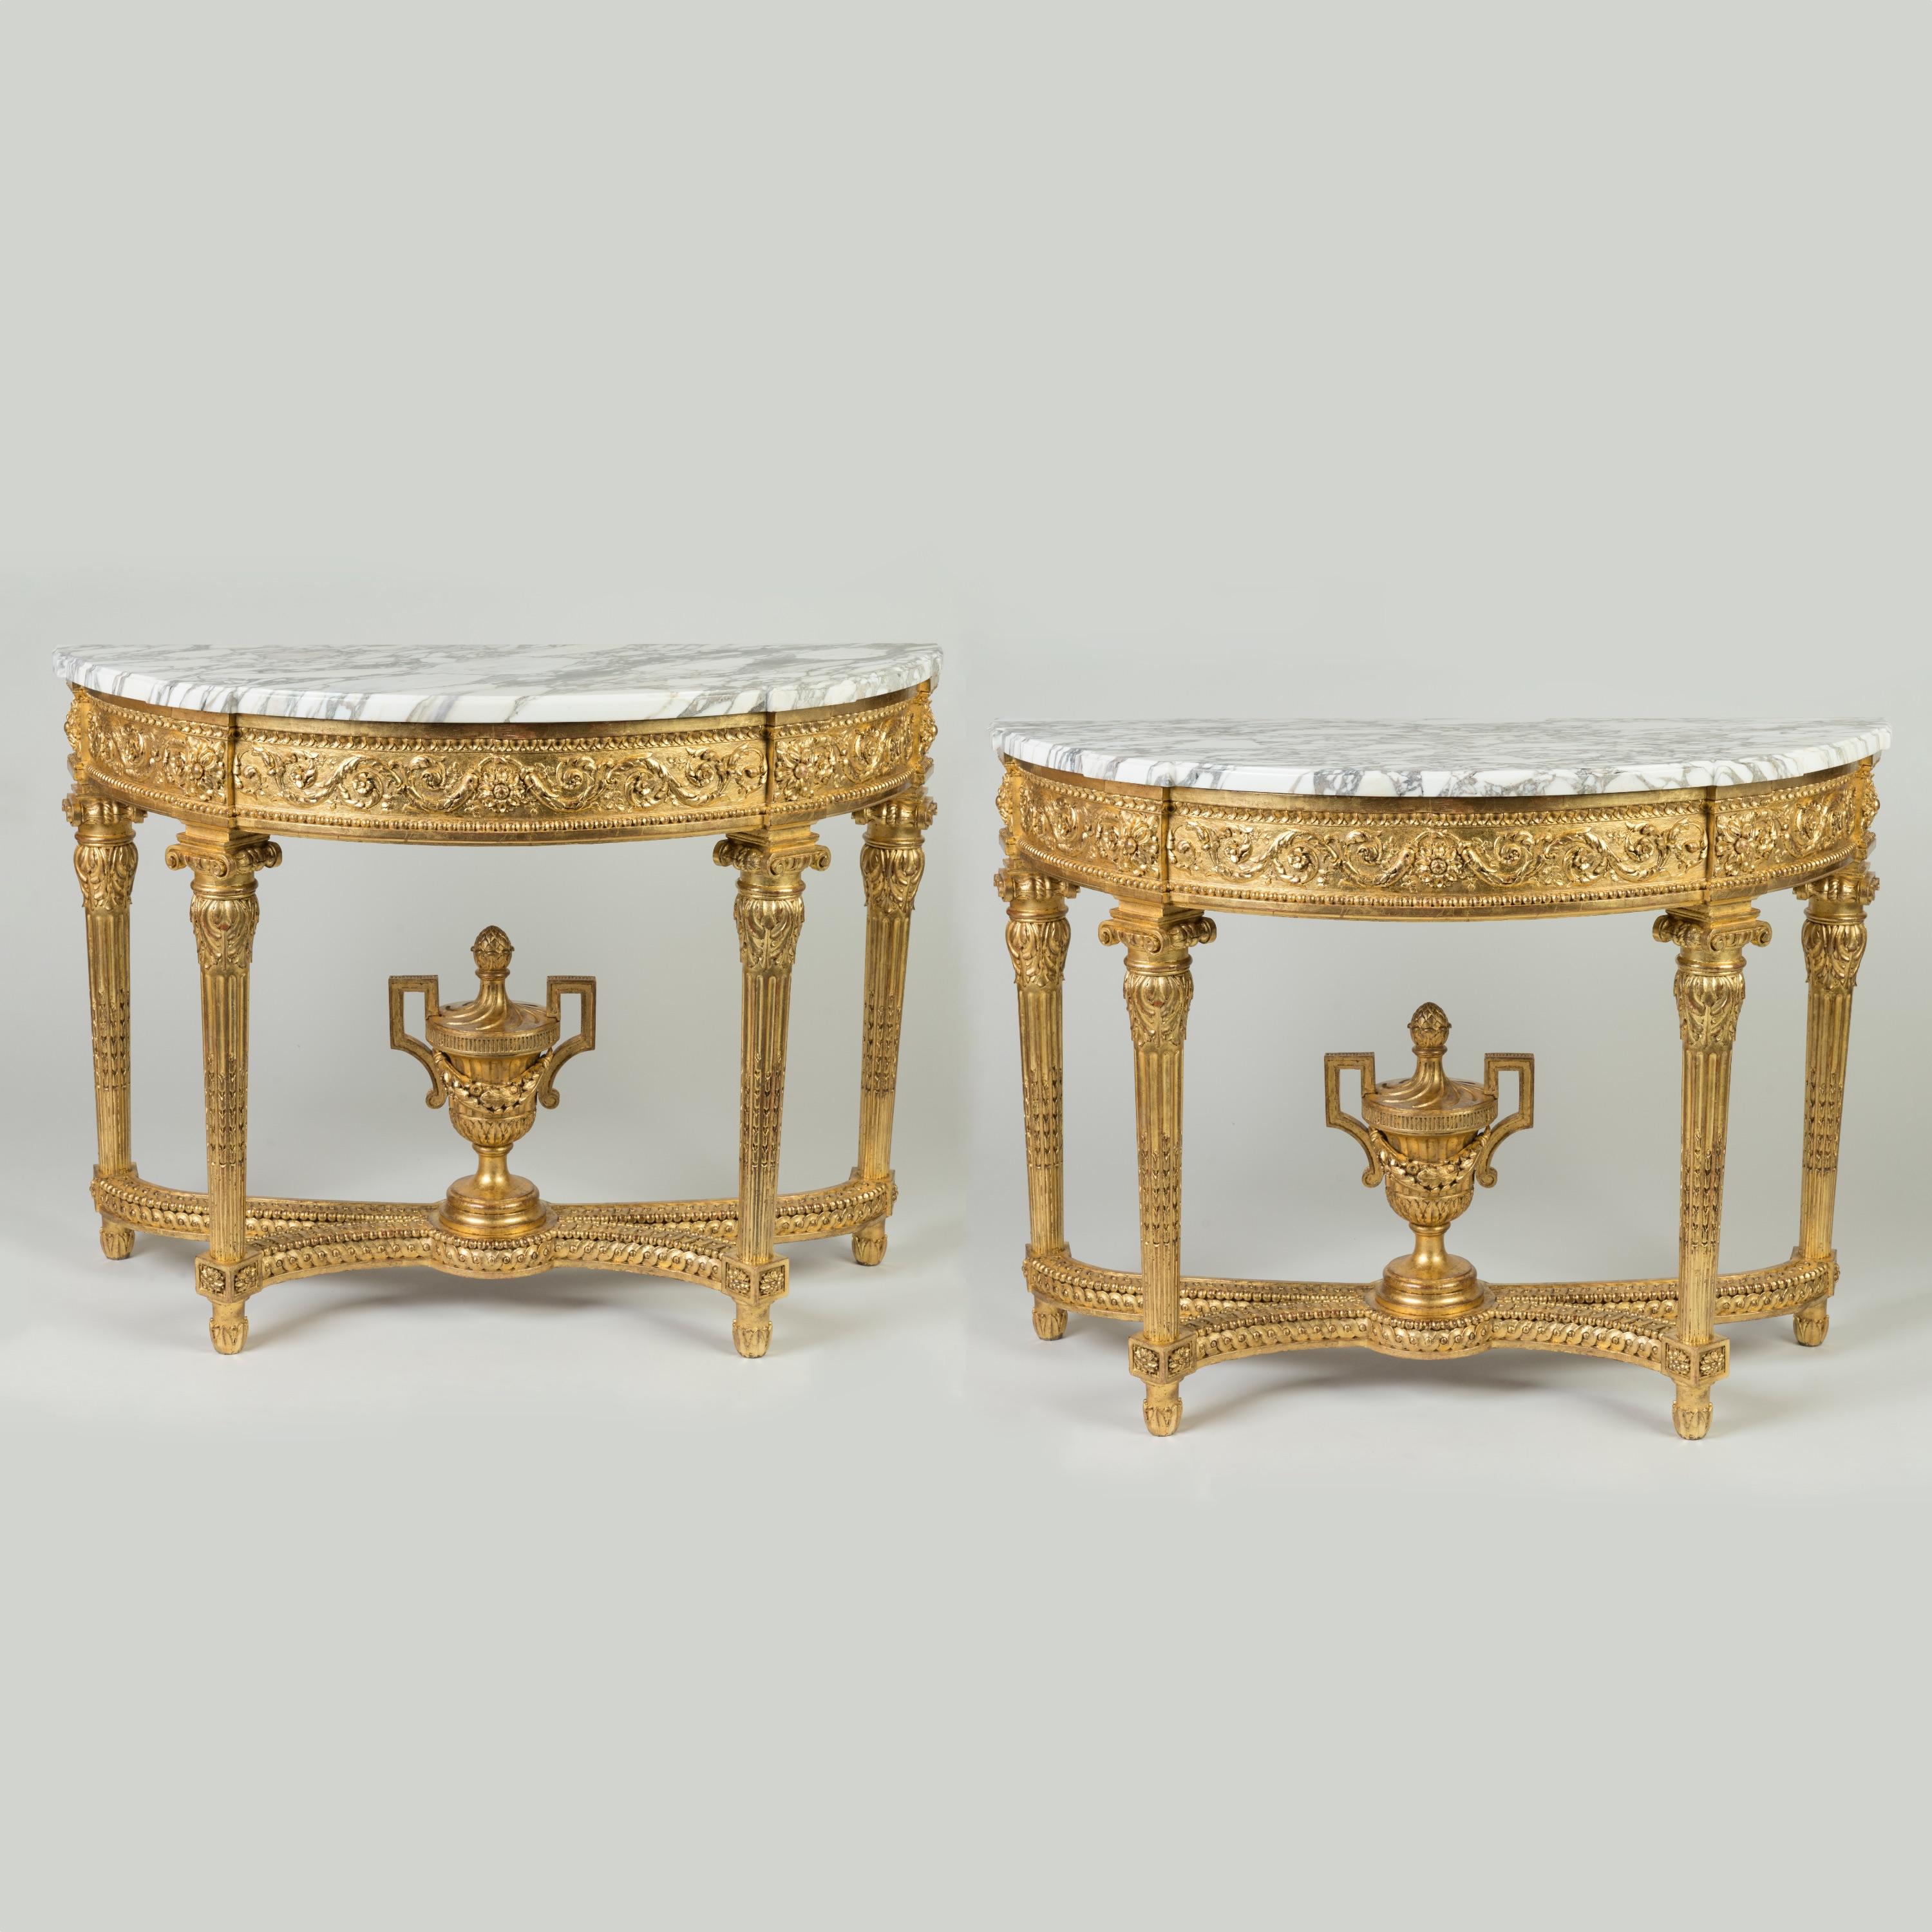 An Important Pair of Stately Console Tables
In the Louis XVI Manner

Constructed in carved and gilded wood; rising from four stop-fluted legs adorned with lotus bud forms and terminating in ionic capitals; having conjoining stylised 'X' form